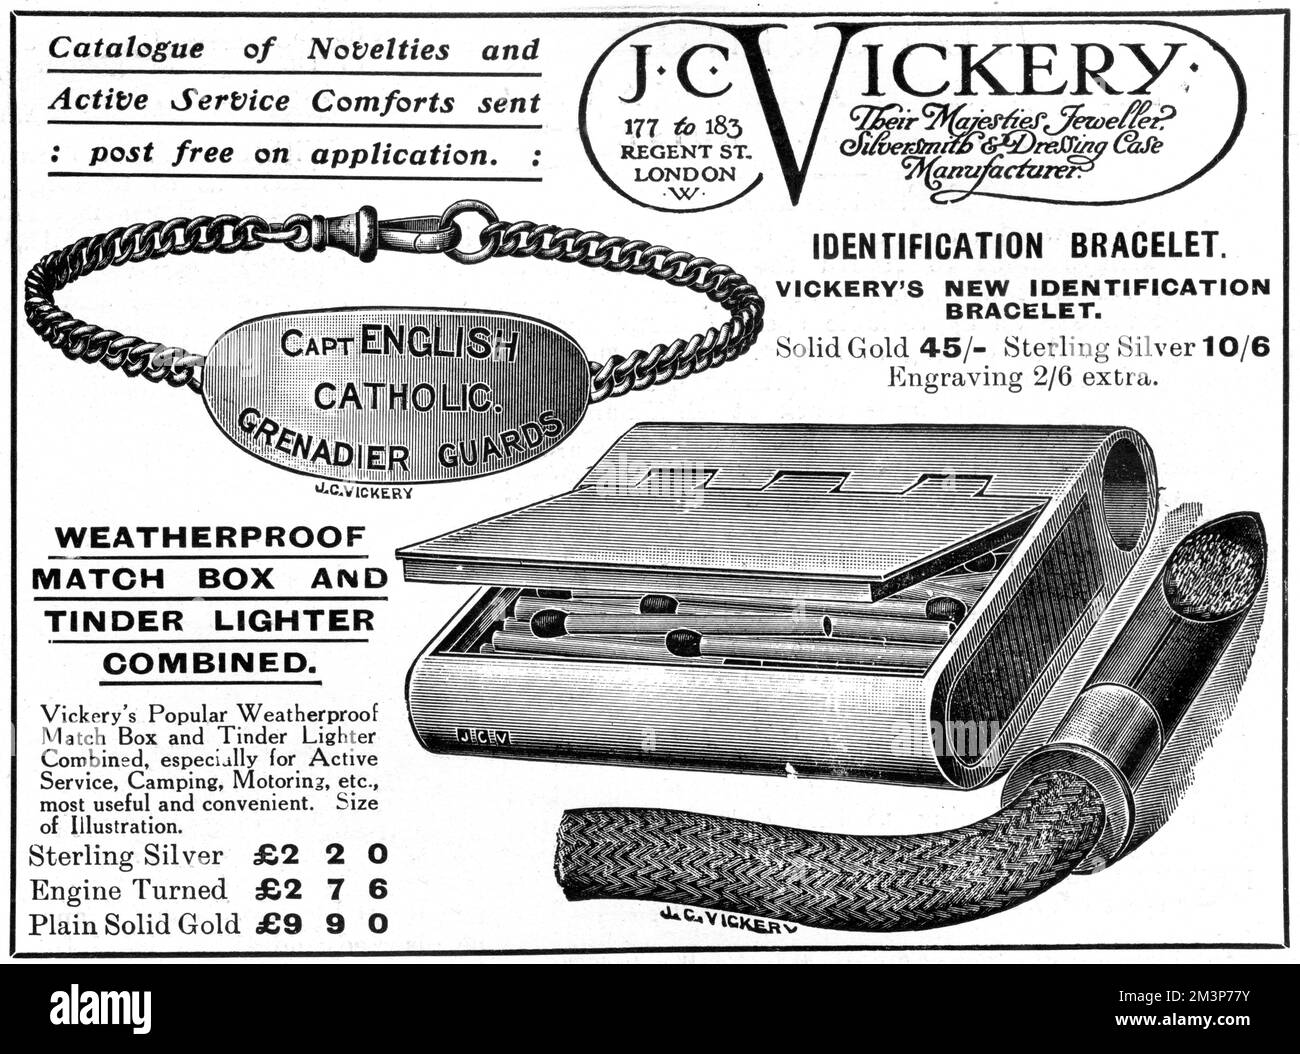 Advertisement for J. C. Vickery, Their Majesties' Jewellers, with two suggestions out of their various novelties and comforts for men on active service - a weatherproof match box and tinder lighter combined and, rather morbidly, an identity bracelet which notes, name, rank, religion and regiment.       Date: 1916 Stock Photo